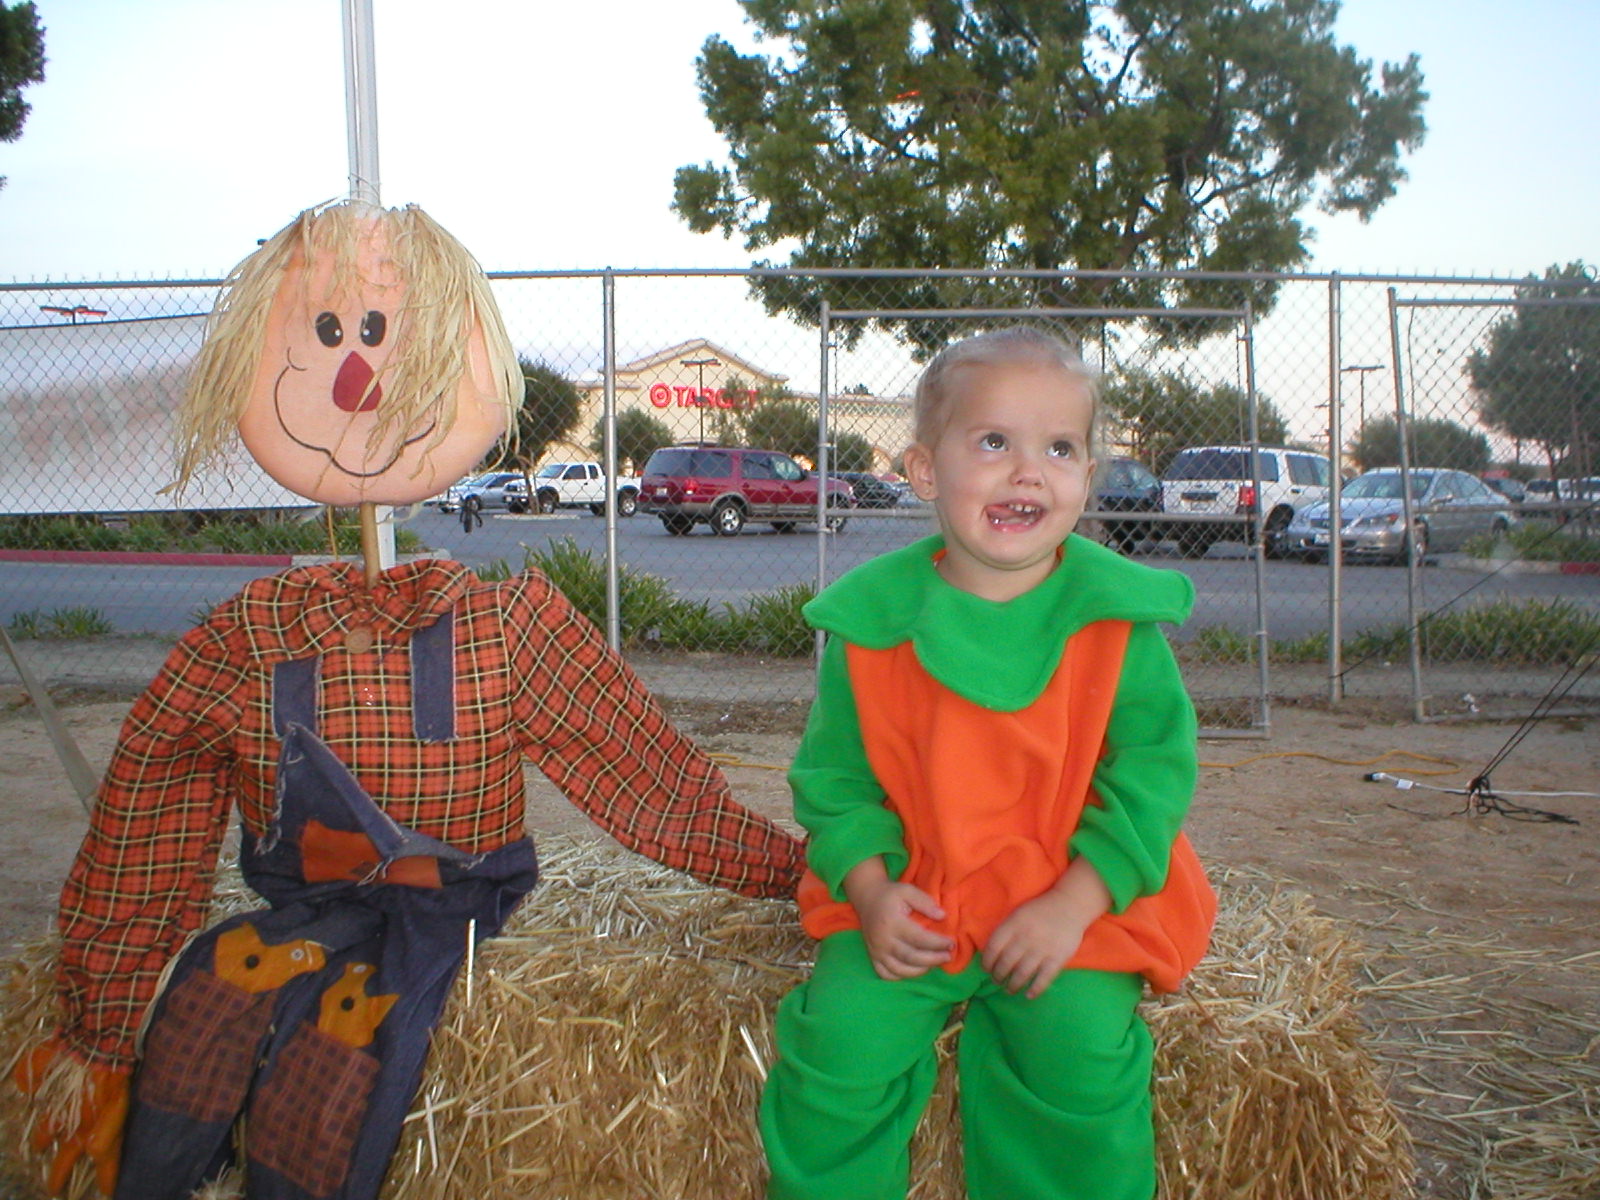 At the "Pumpkin Park" being silly